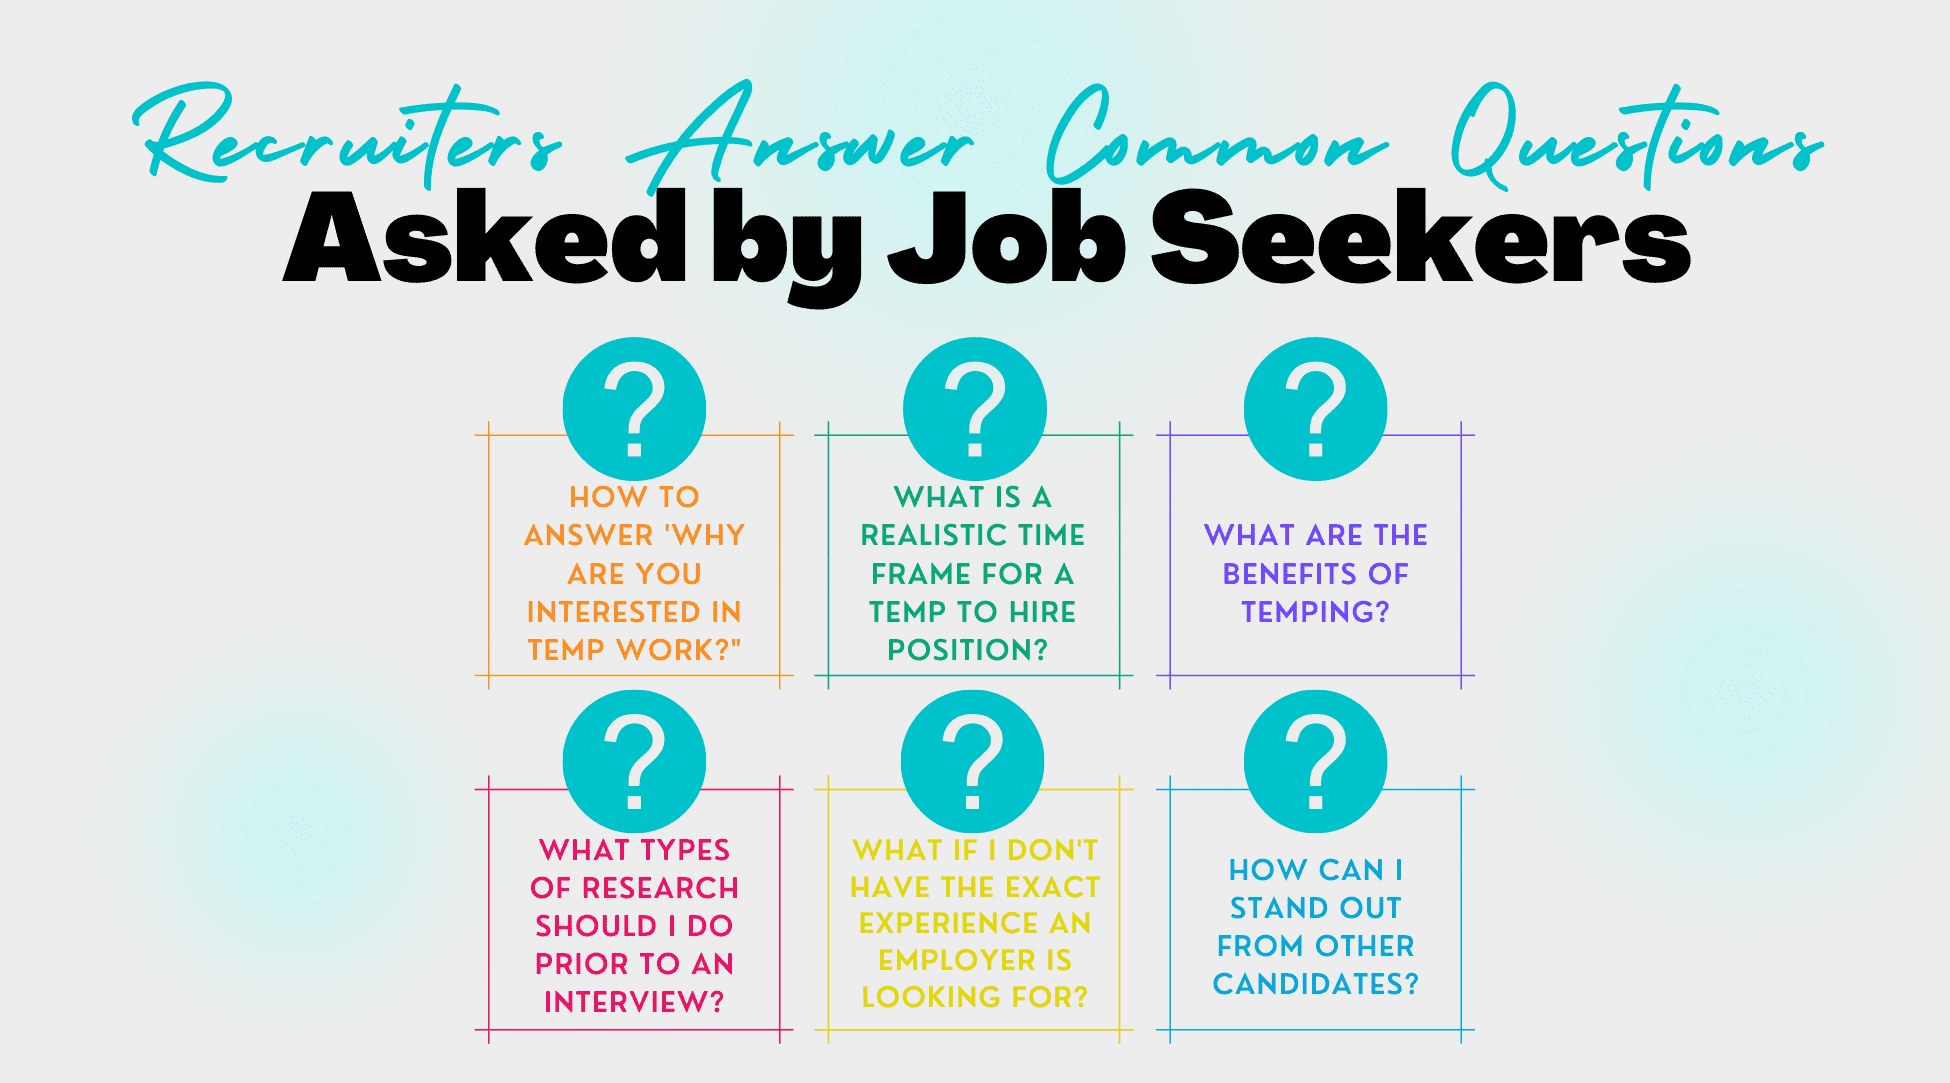 Recruiters Answer Common Questions Asked By Job Seekers (1)